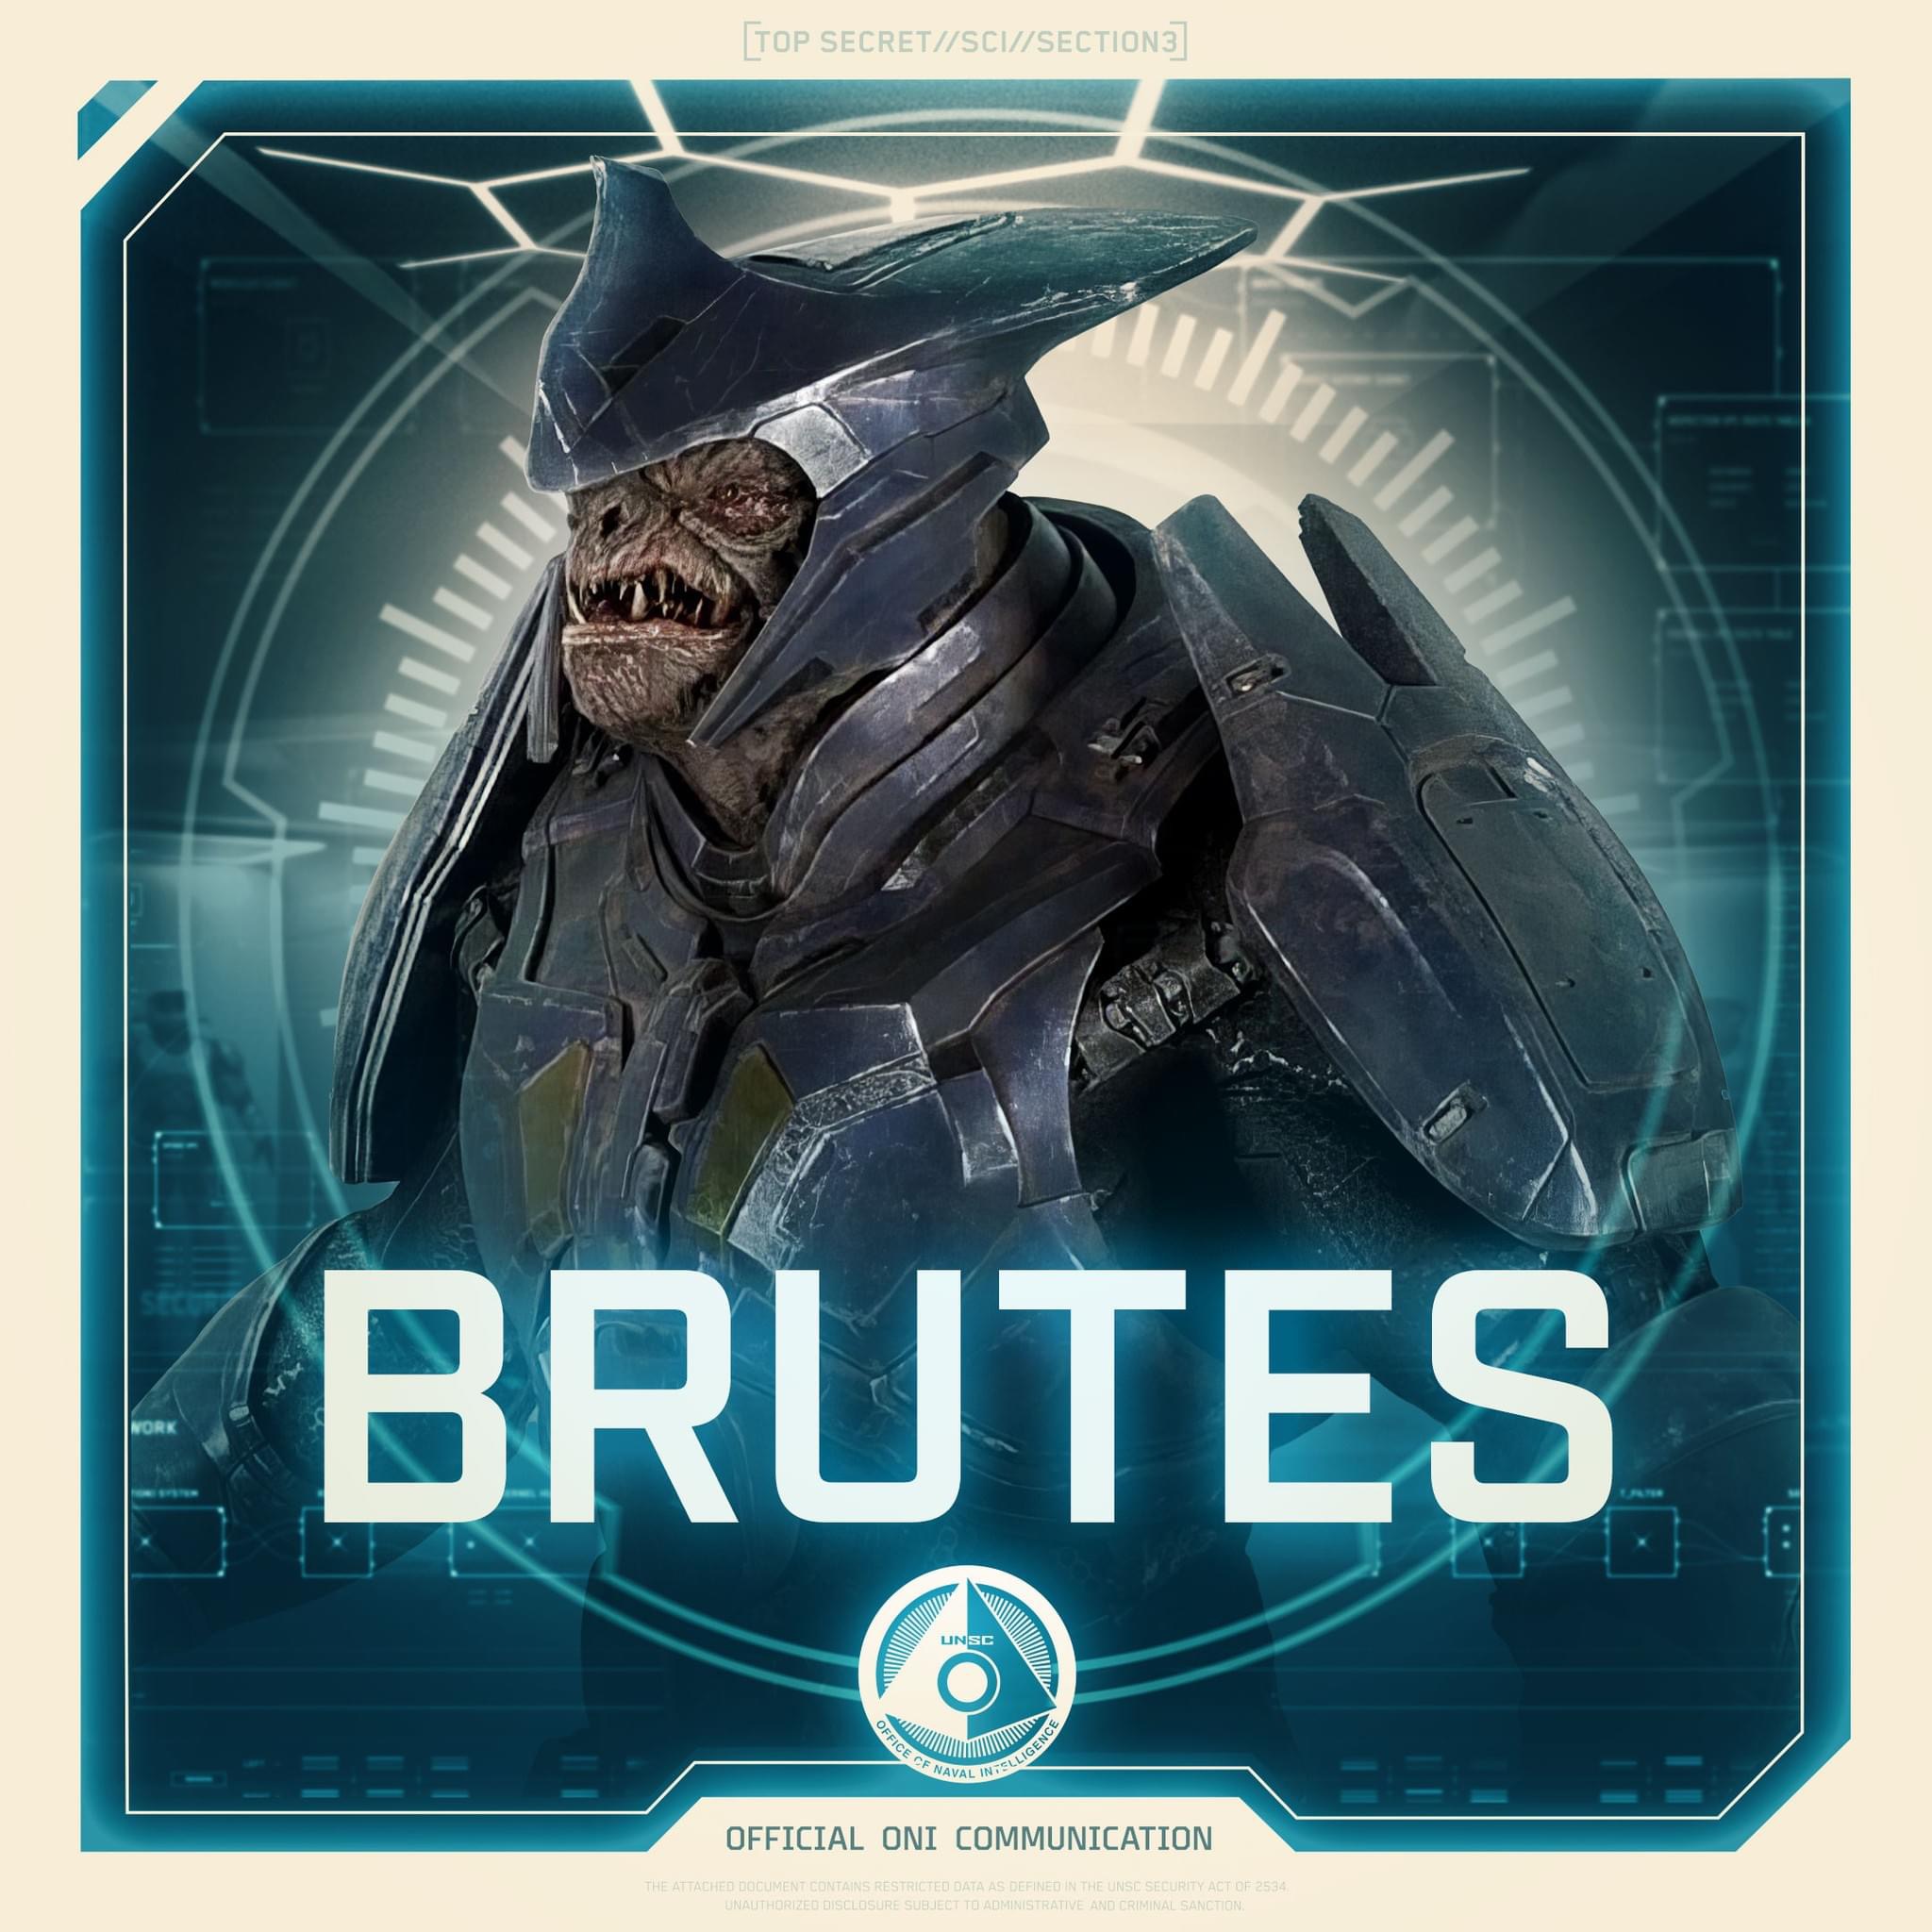 Halo the Series - Brutes